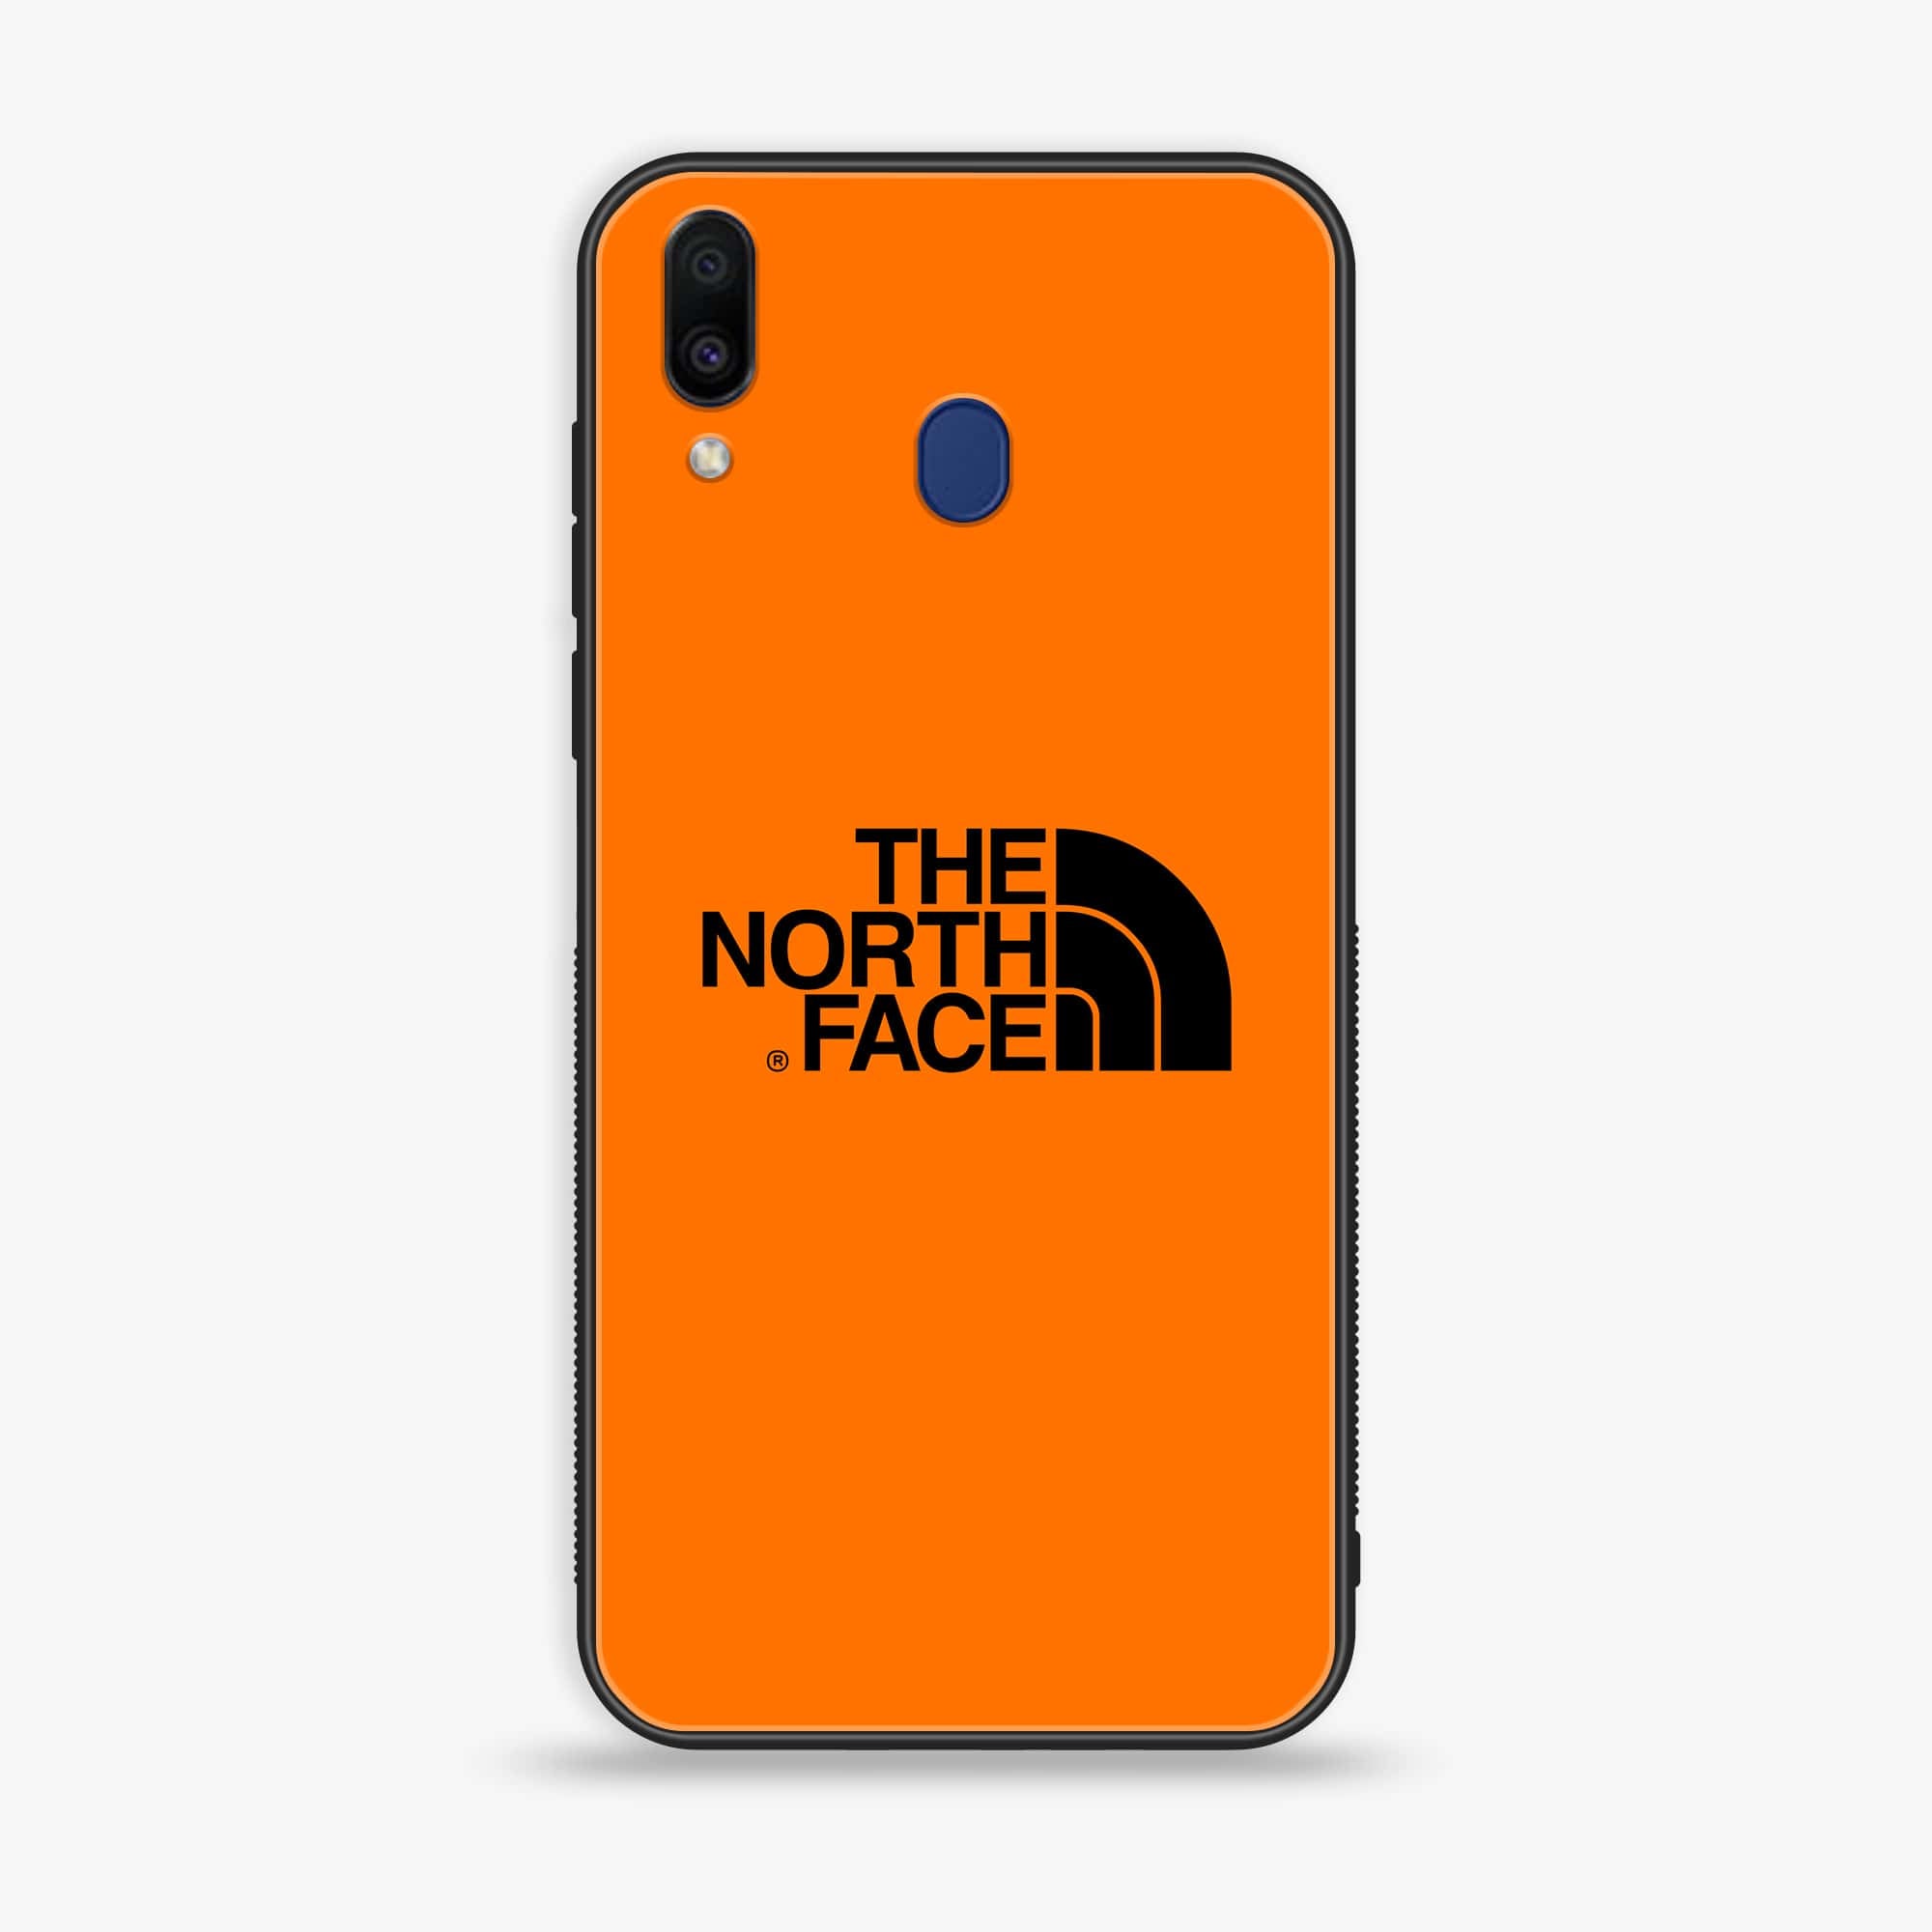 Samsung Galaxy M20 - The North Face Series - Premium Printed Glass soft Bumper shock Proof Case